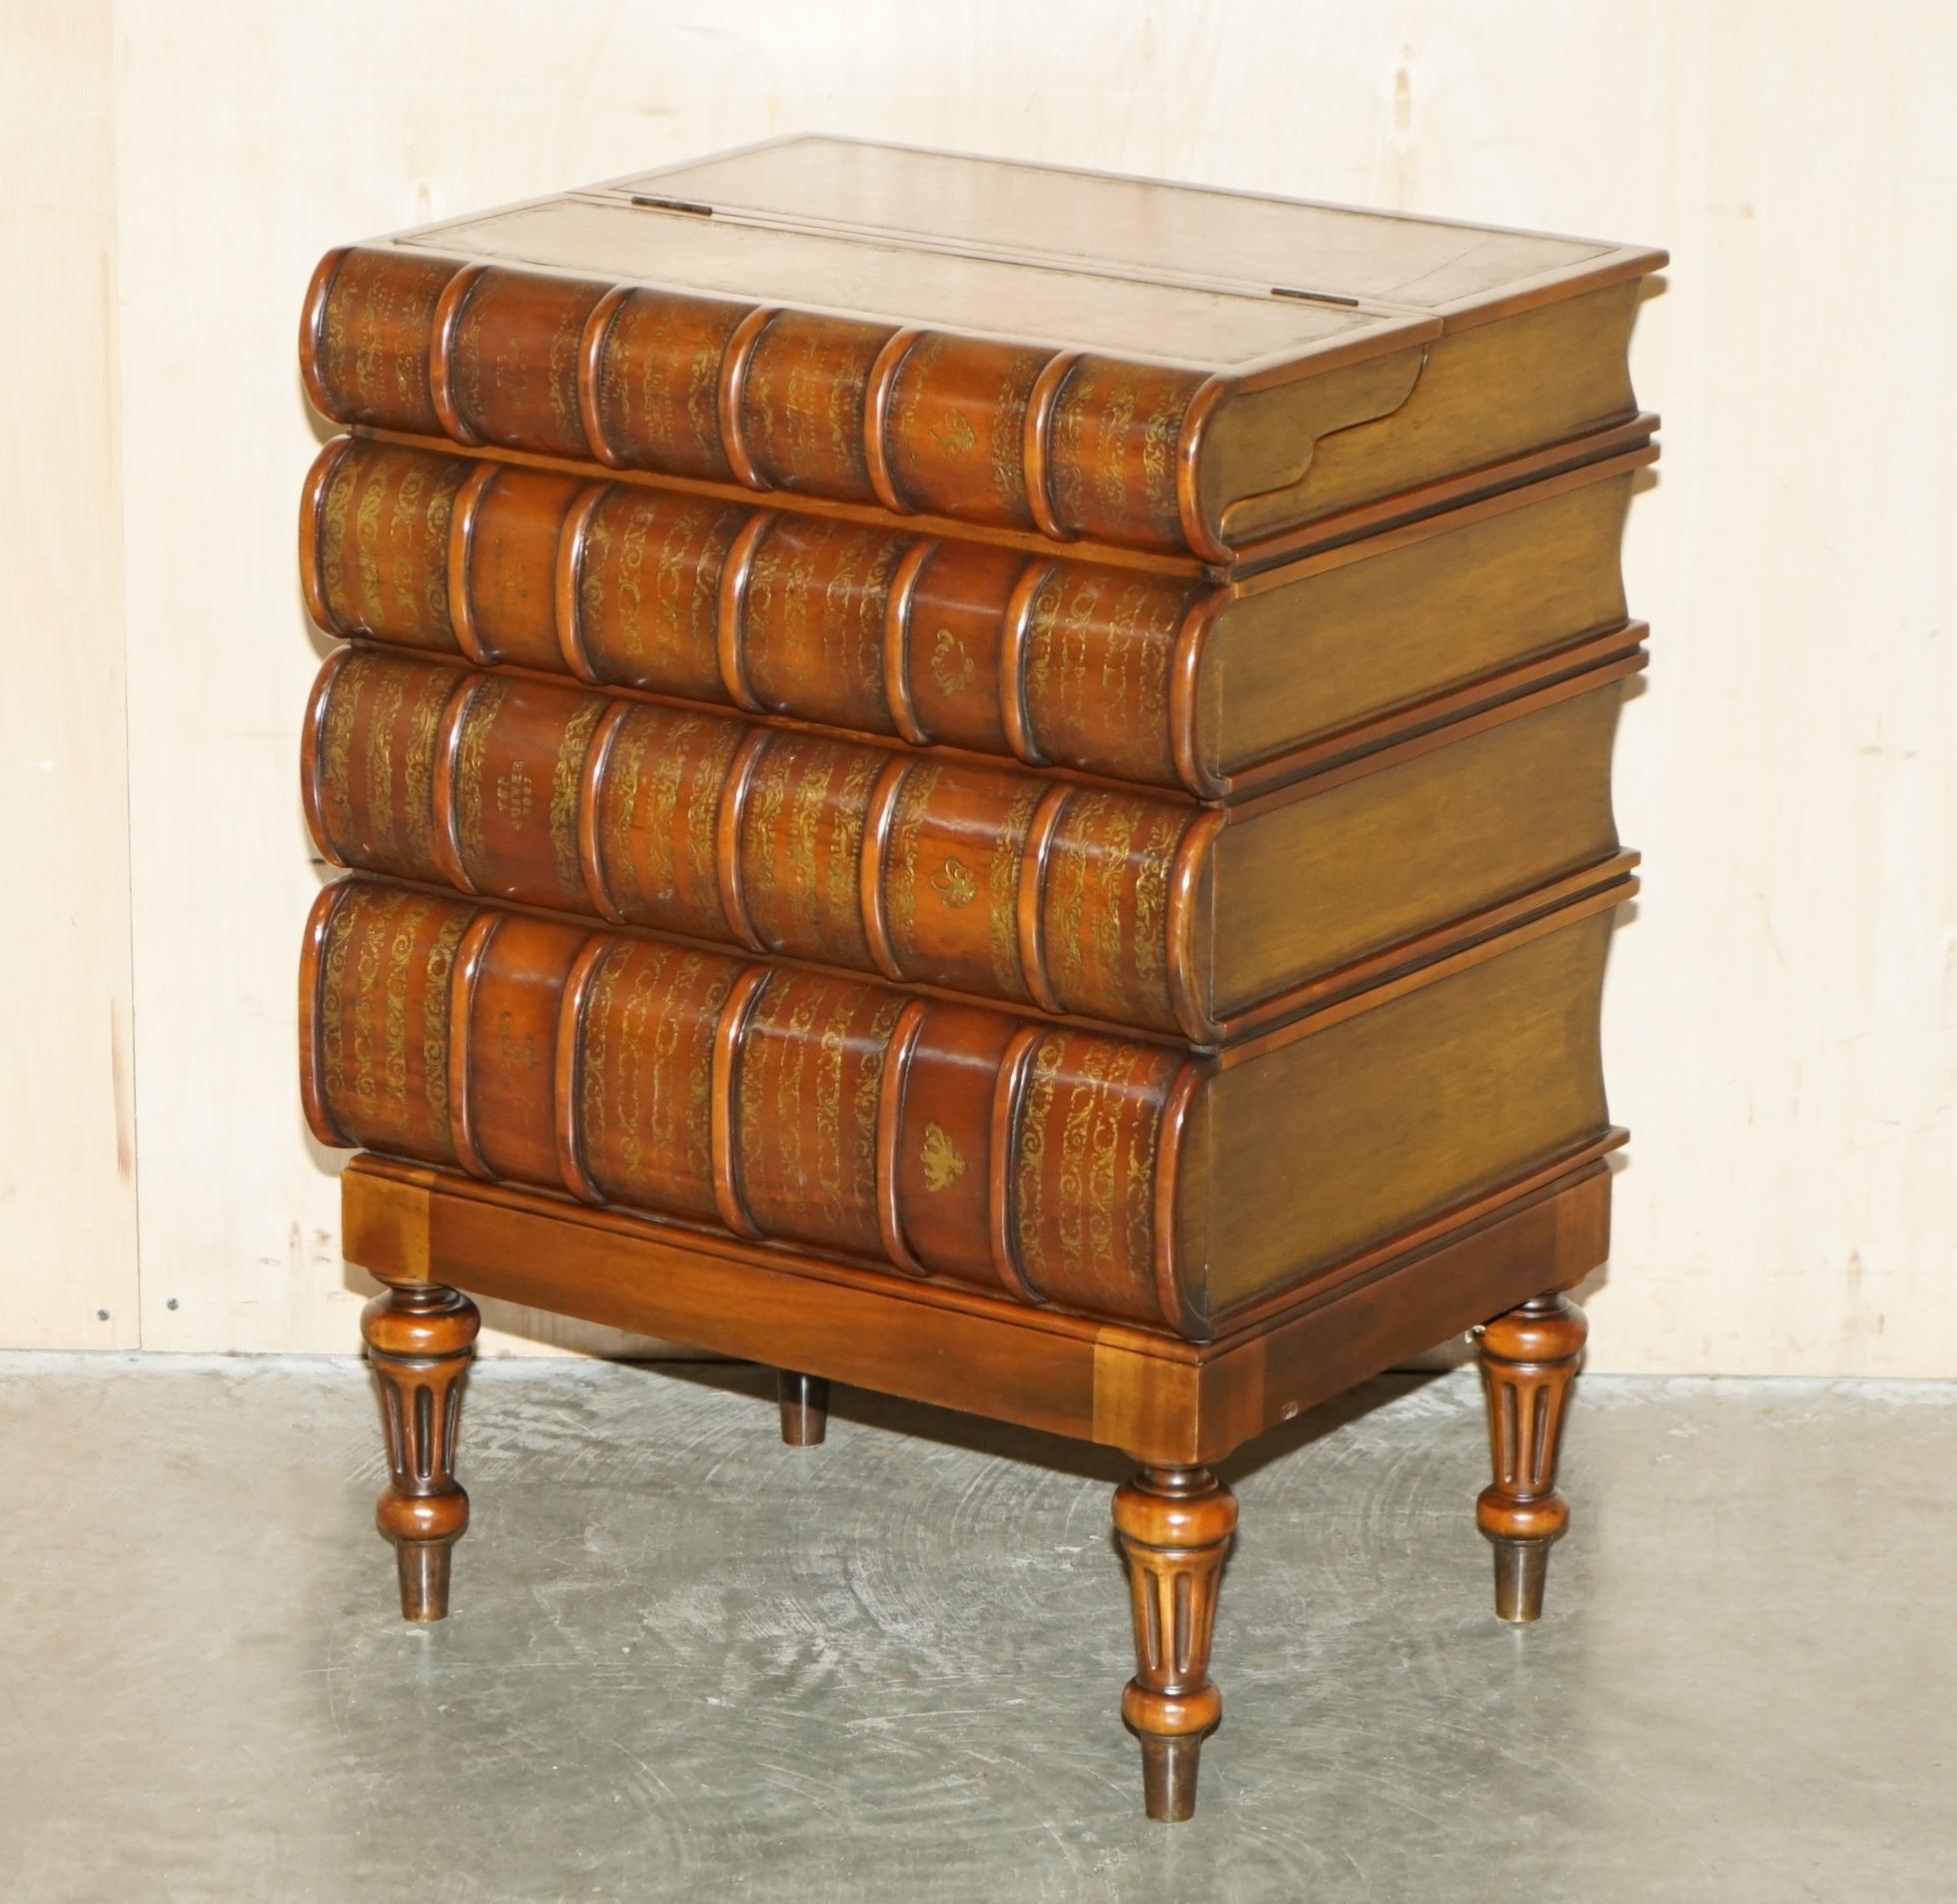 Royal House Antiques

Royal House Antiques is delighted to offer for sale this super rare, custom made to order Theodore Alexander Faux book chest of drawers with lift up brown leather writing bureau top 

Please note the delivery fee listed is just